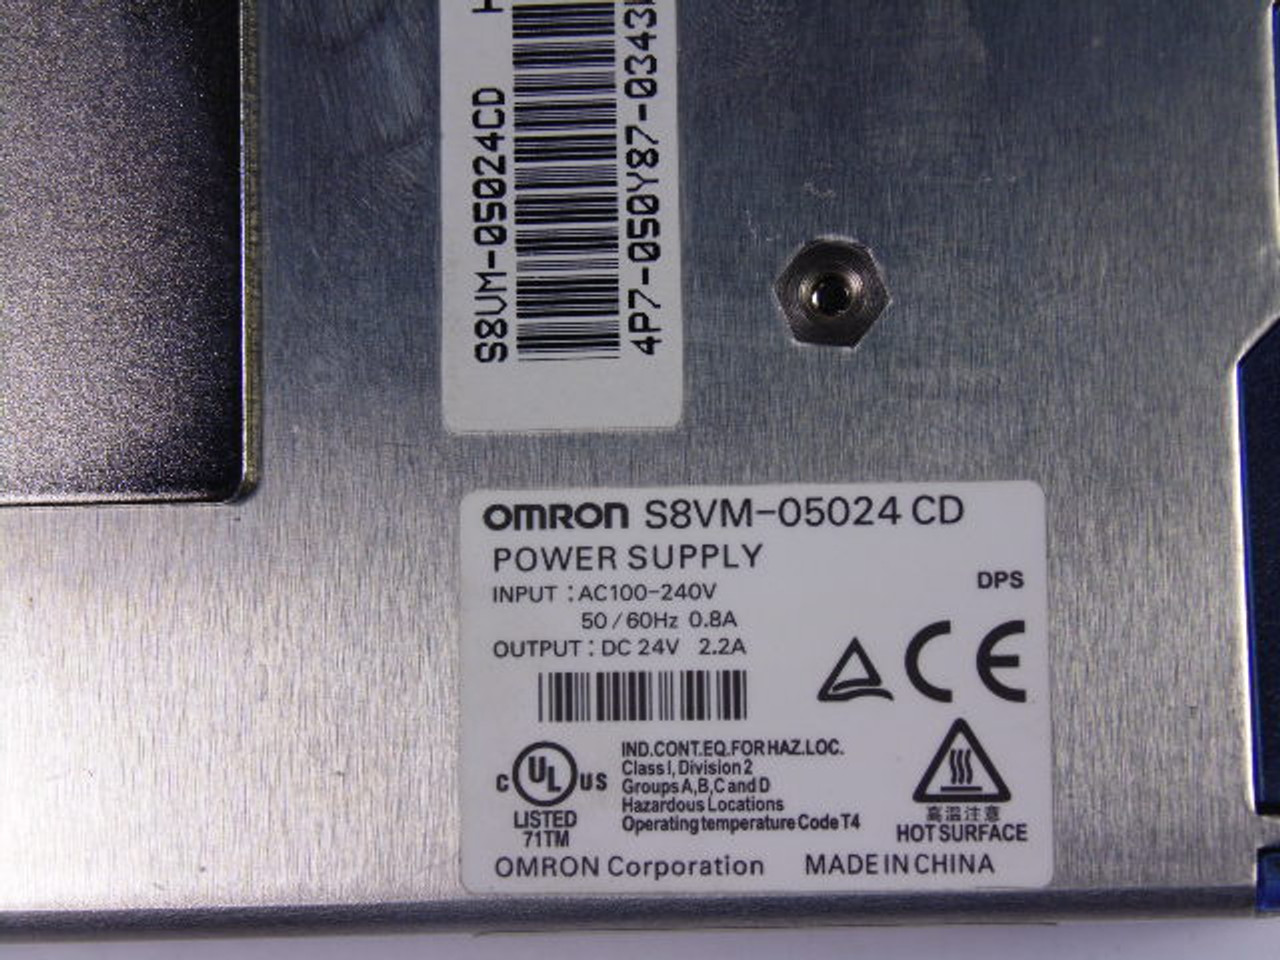 Omron S8VM-05024CD Power Supply Input-50/60Hz 0.8A Output-24V 2.2A USED